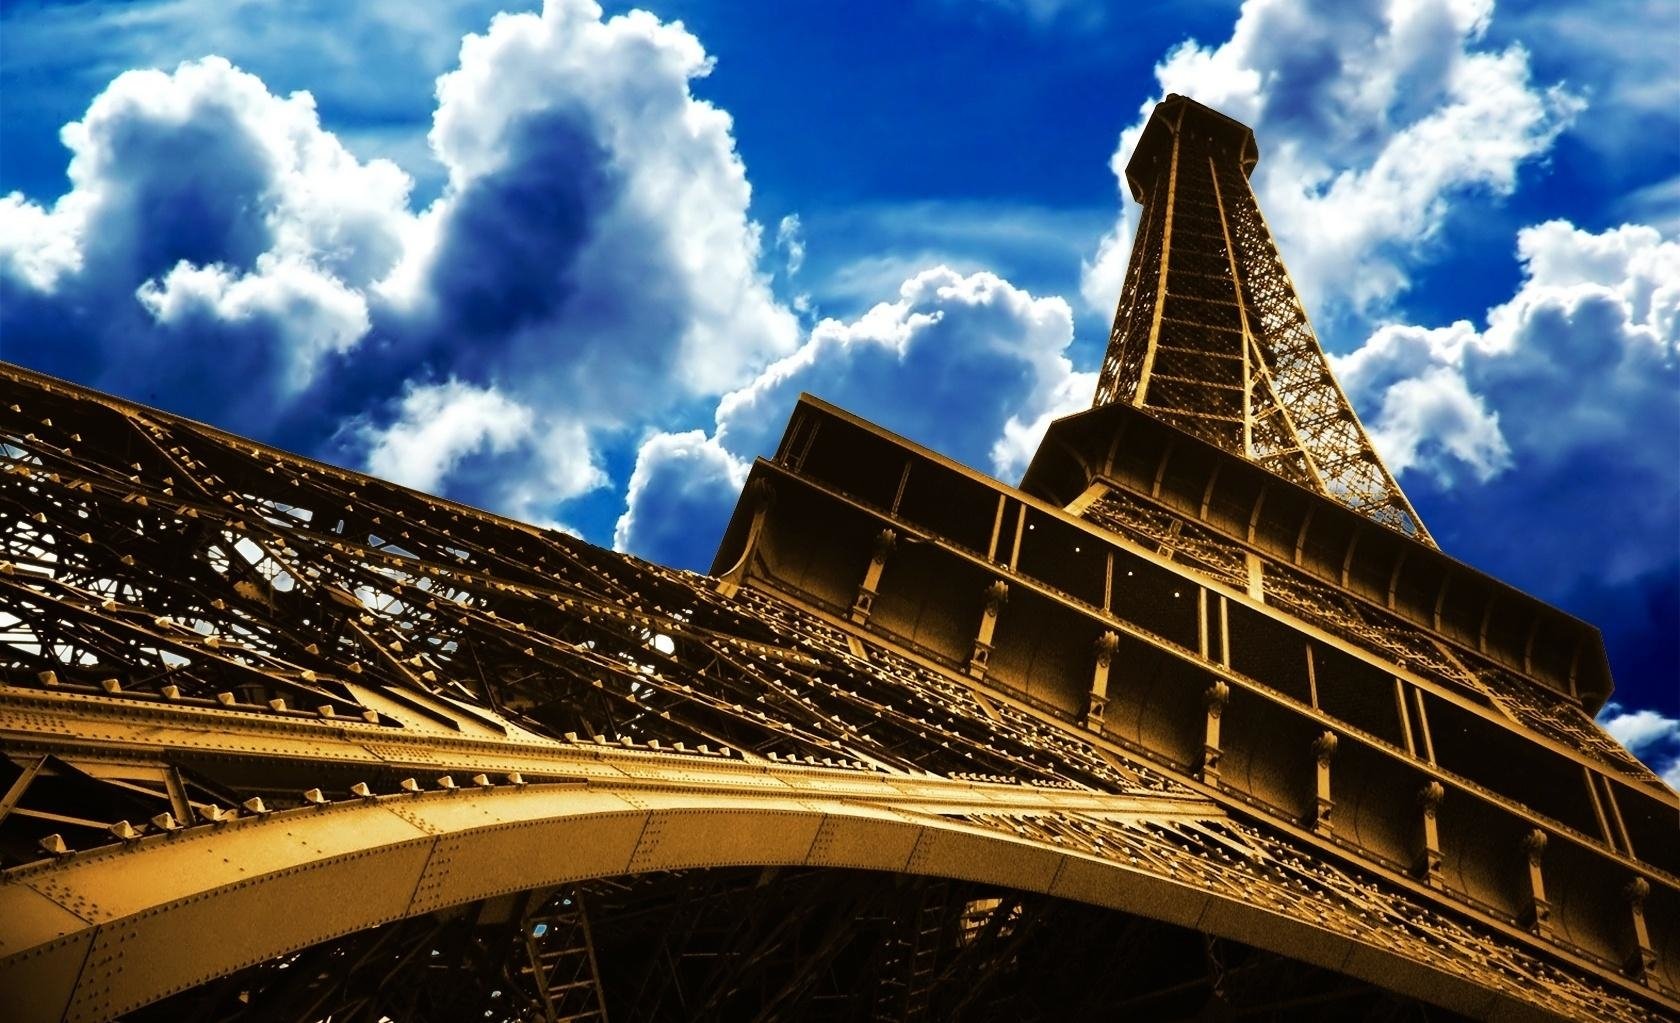 Eiffel Tower Image - ID: 282614 - Image Abyss